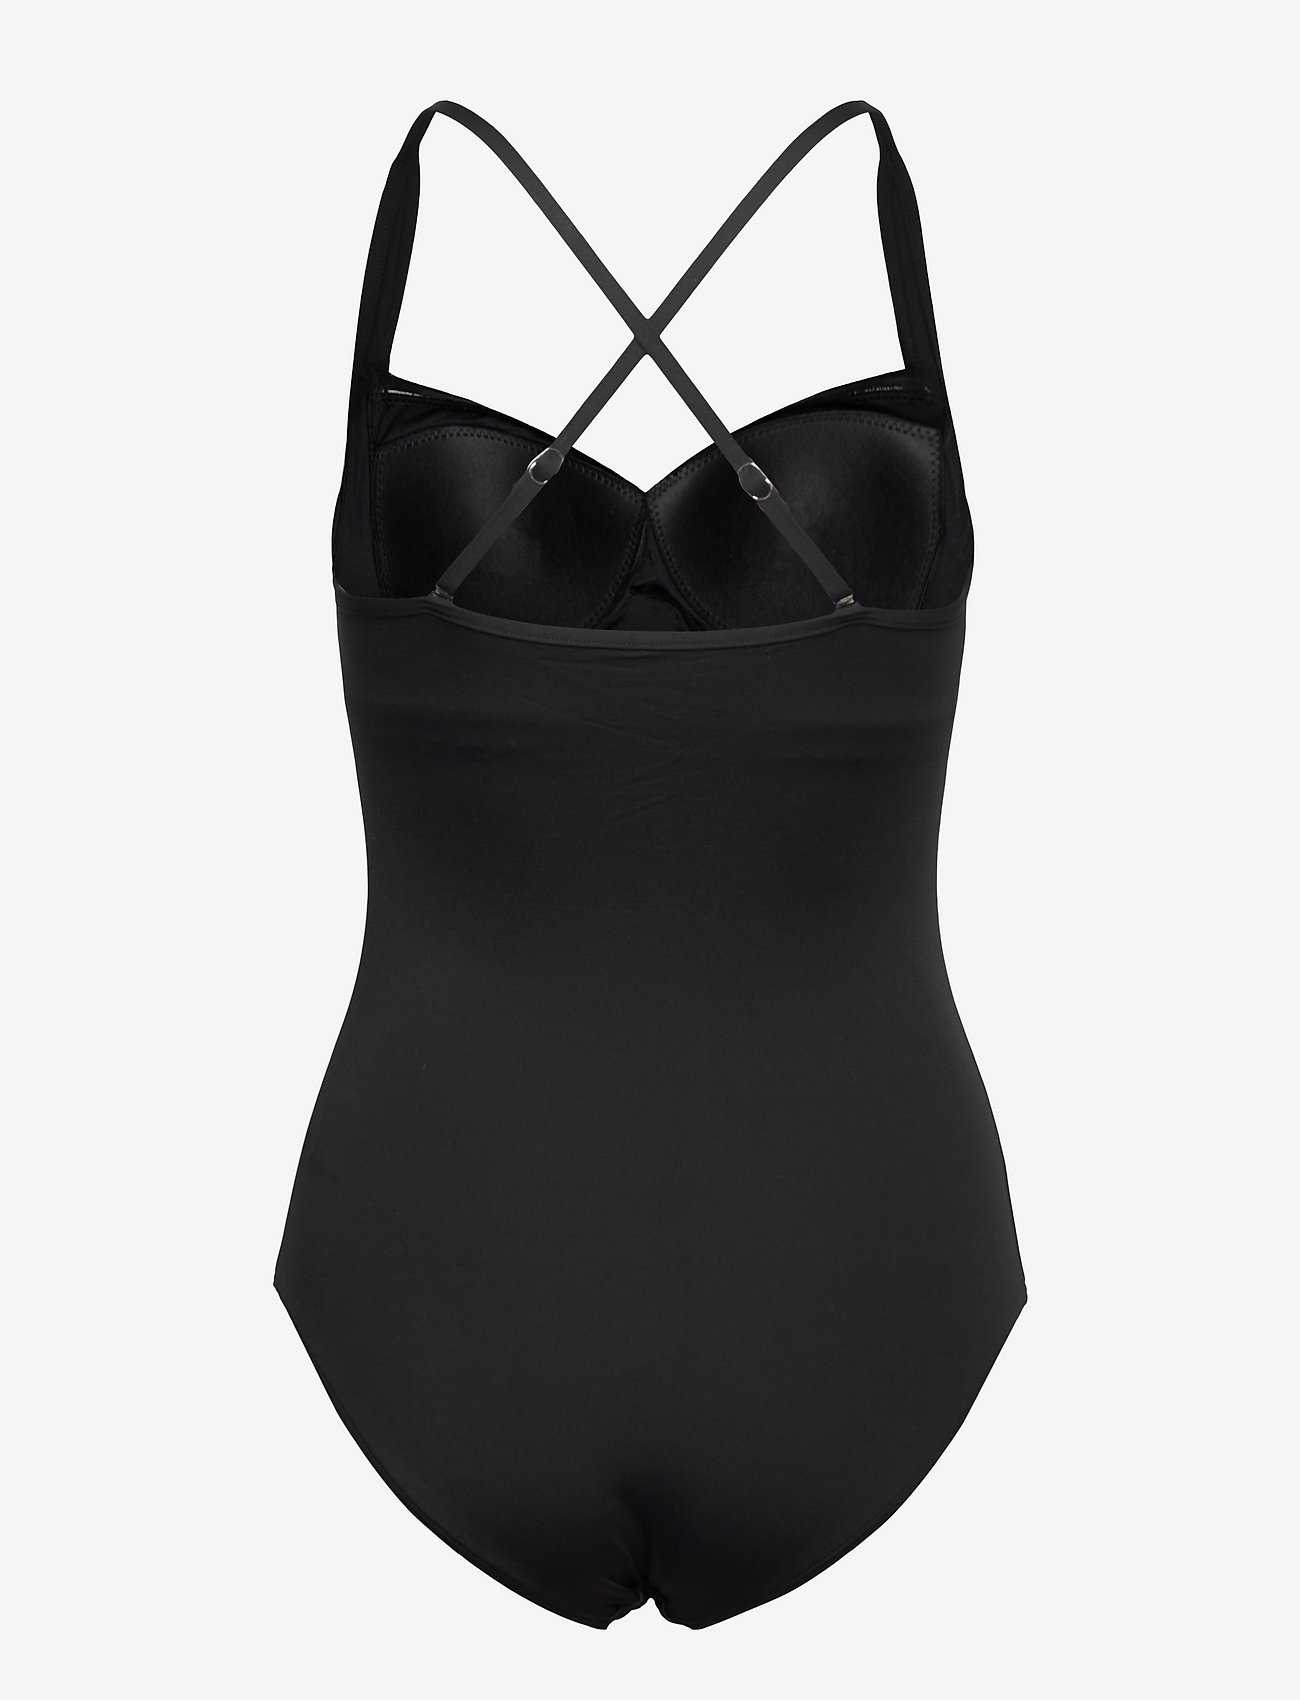 Seafolly - Seafolly Collective Twist Halter One Piece - swimsuits - black - 1